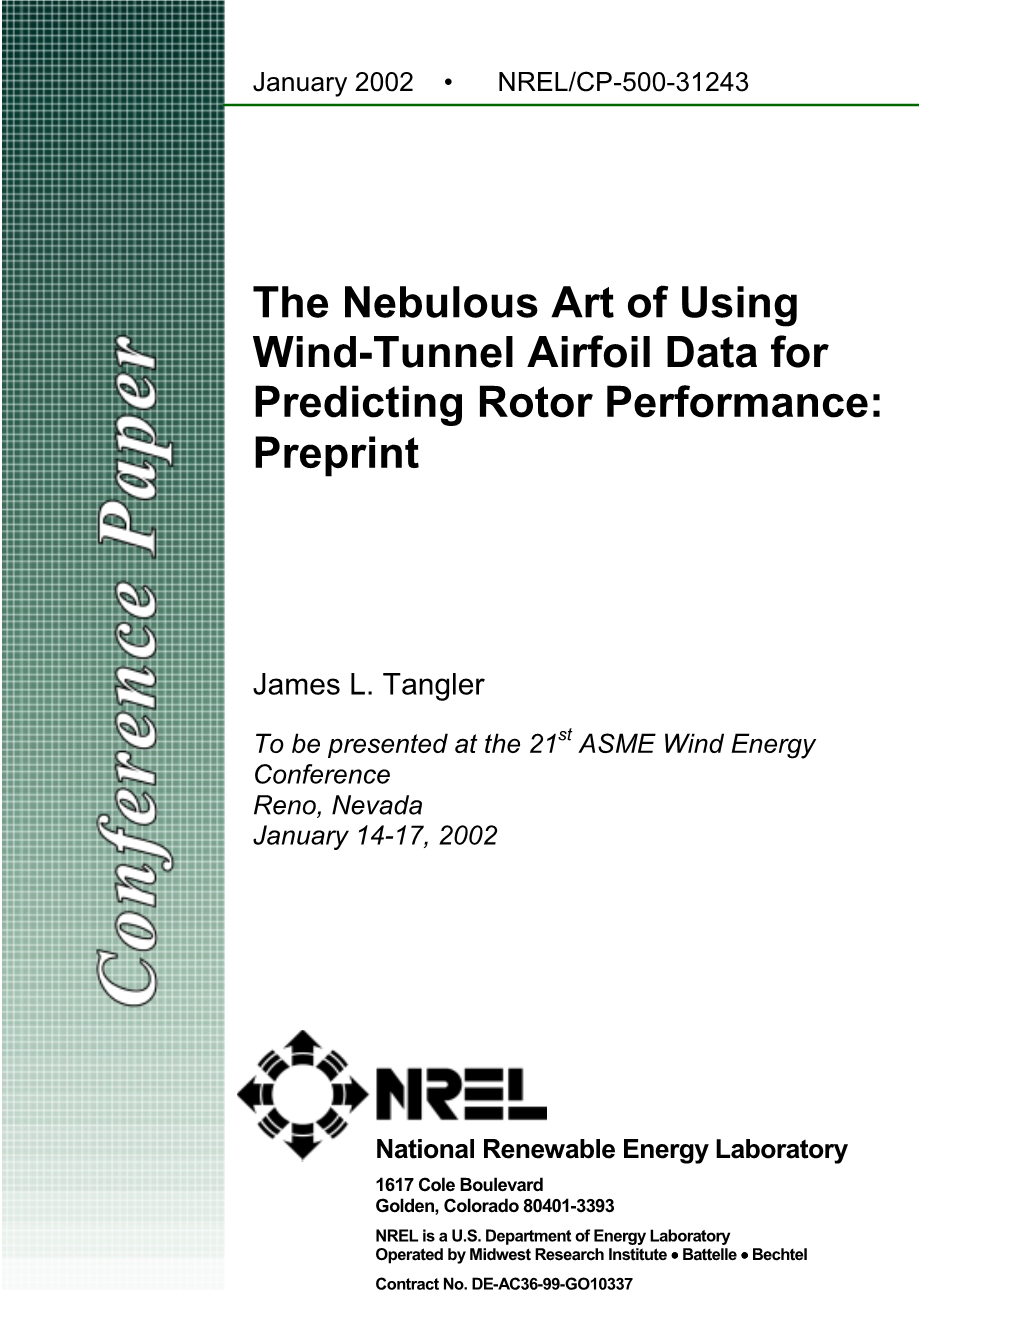 The Nebulous Art of Using Wind-Tunnel Airfoil Data for Predicting Rotor Performance: Preprint